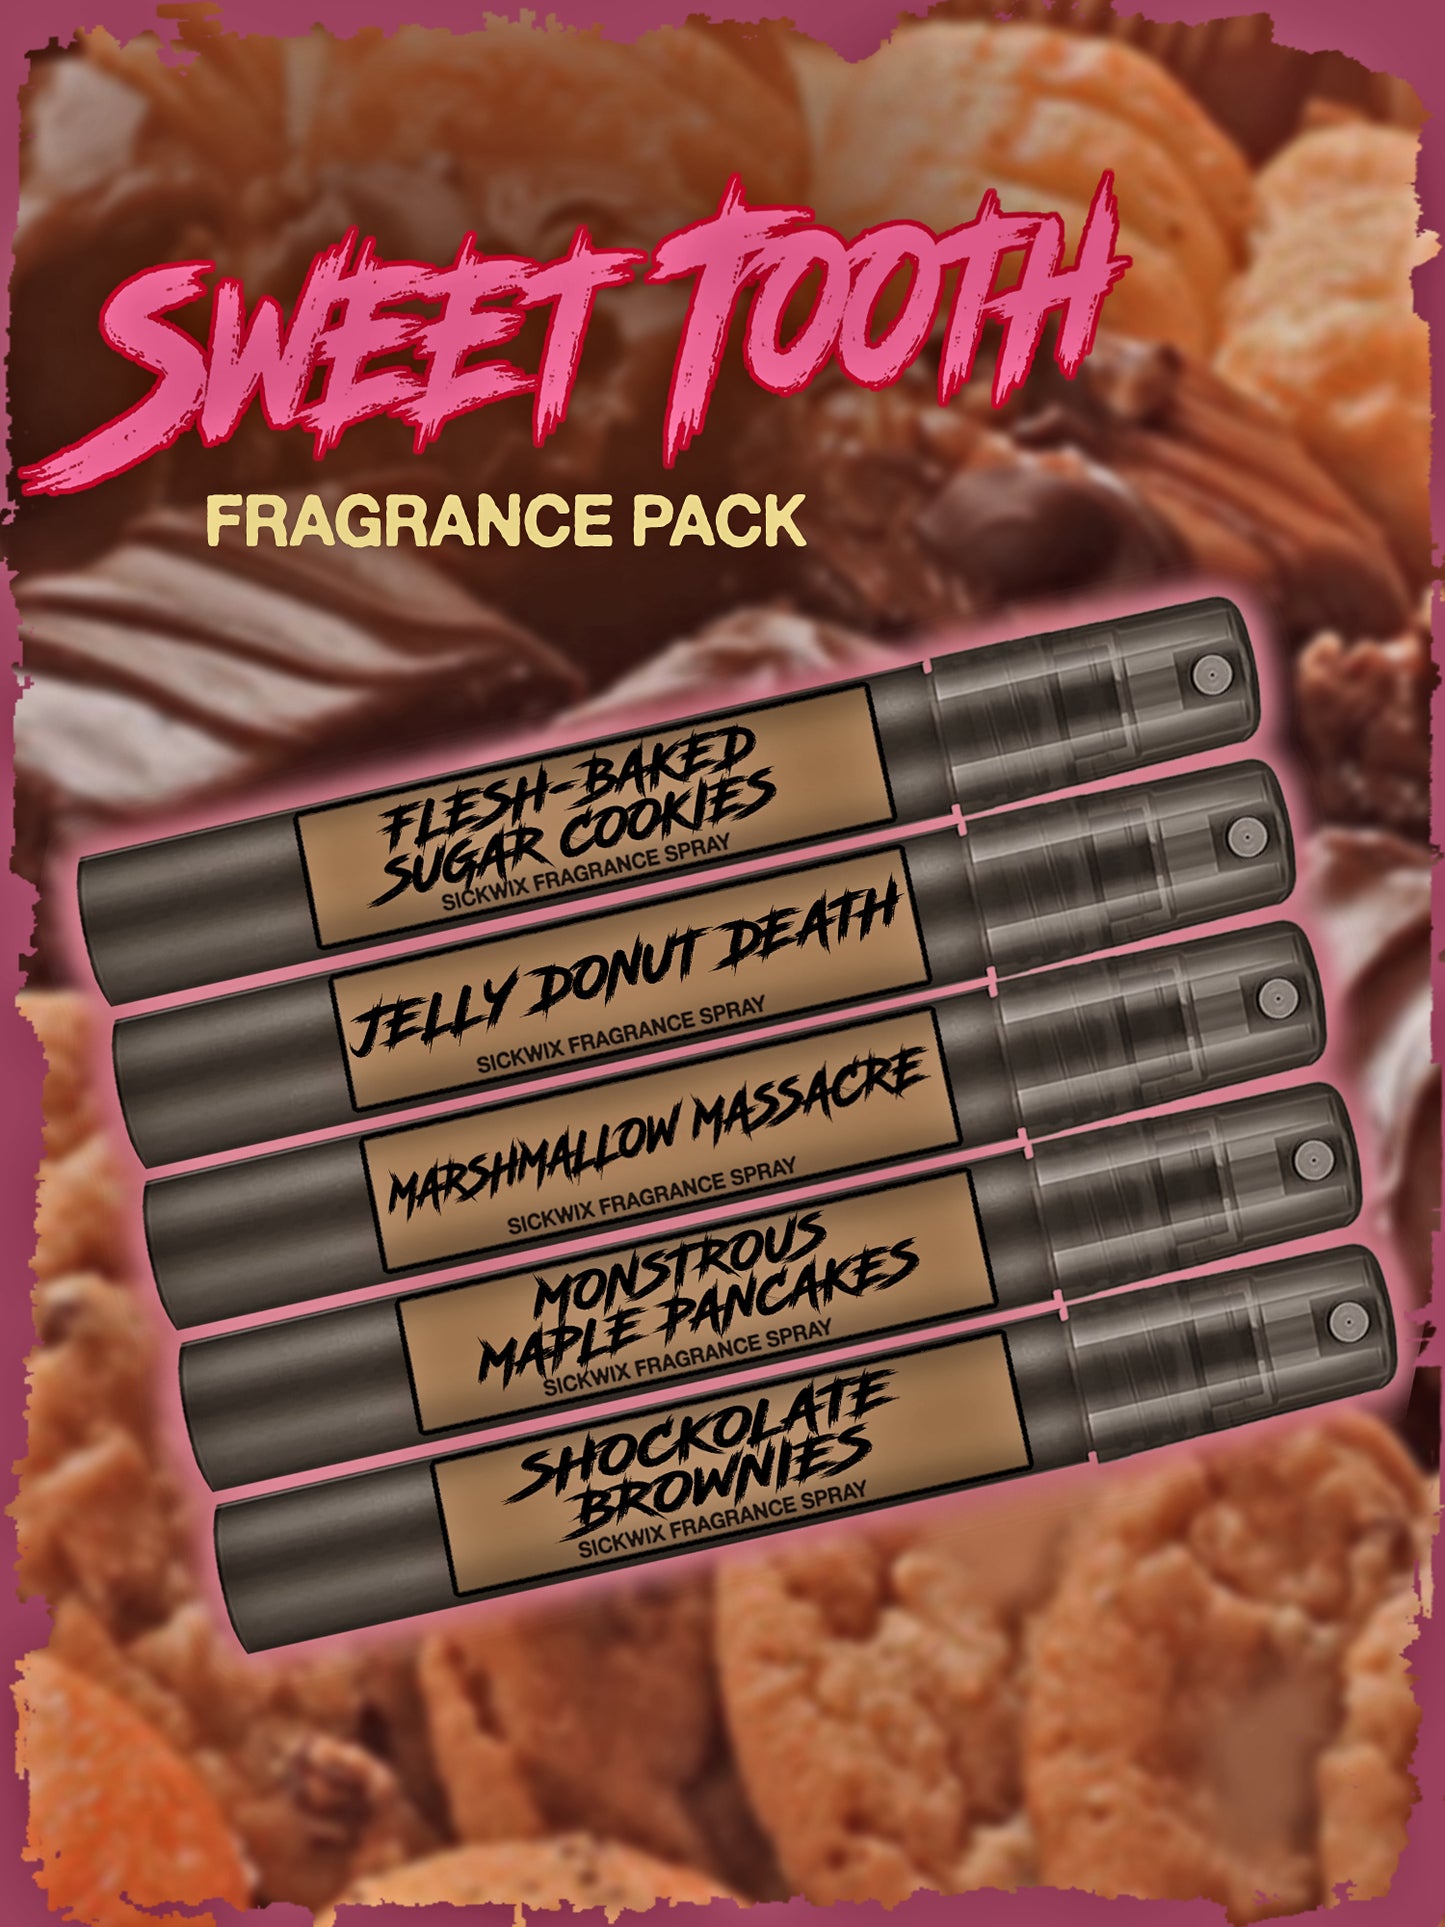 SWEET TOOTH FRAGRANCE PACK